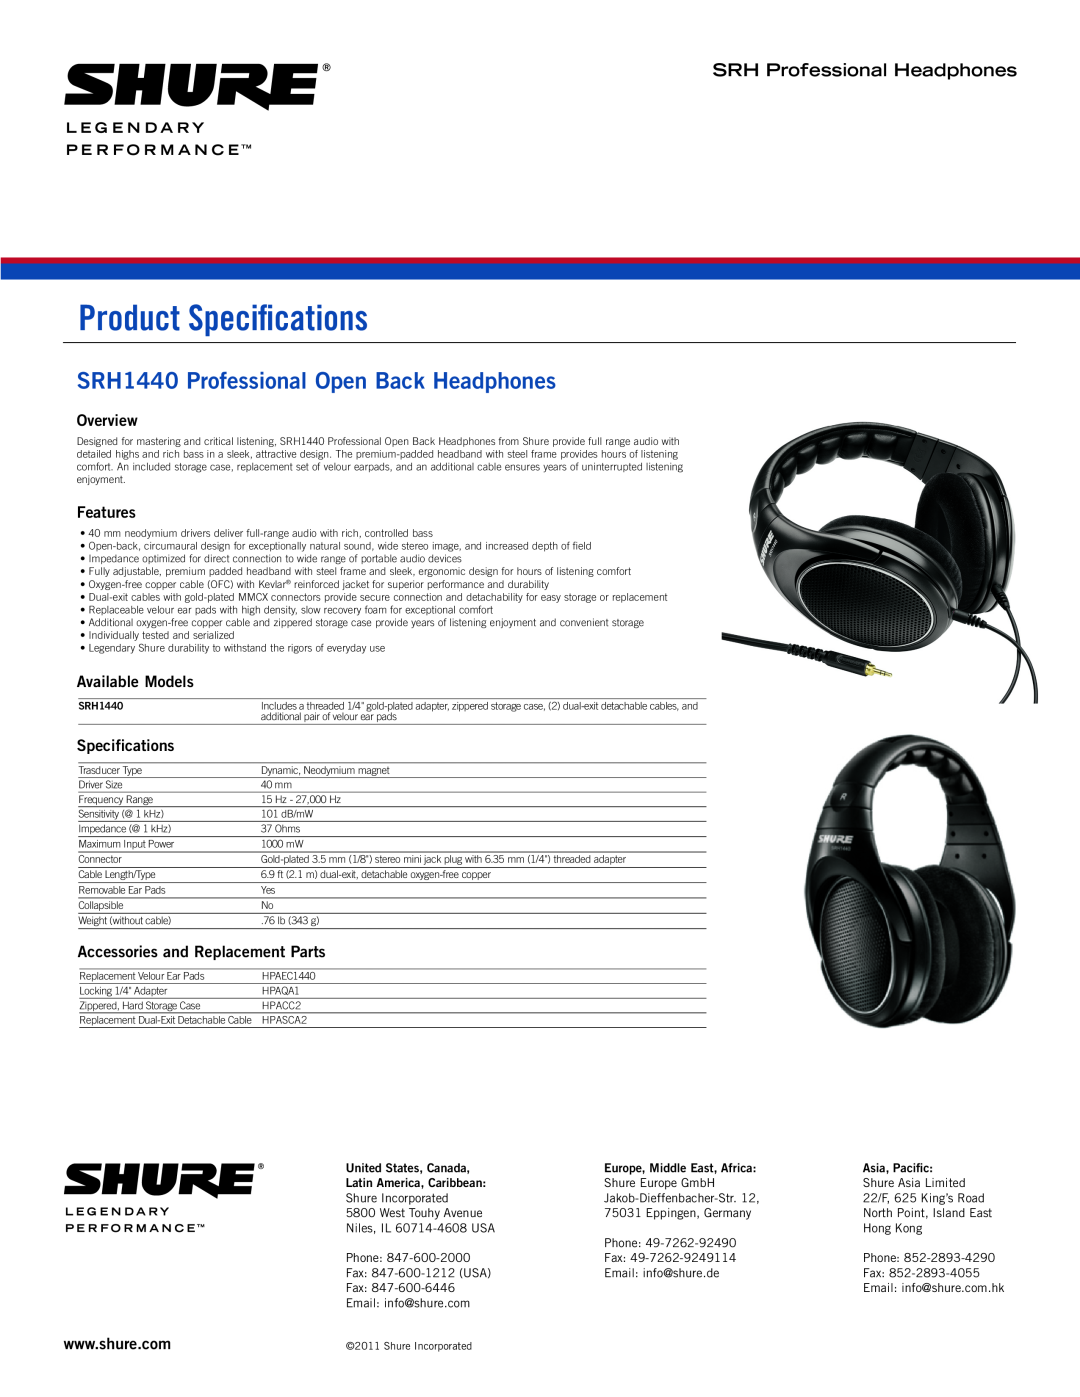 Shure specifications Product Specifications, SRH1440 Professional Open Back Headphones, SRH Professional Headphones 